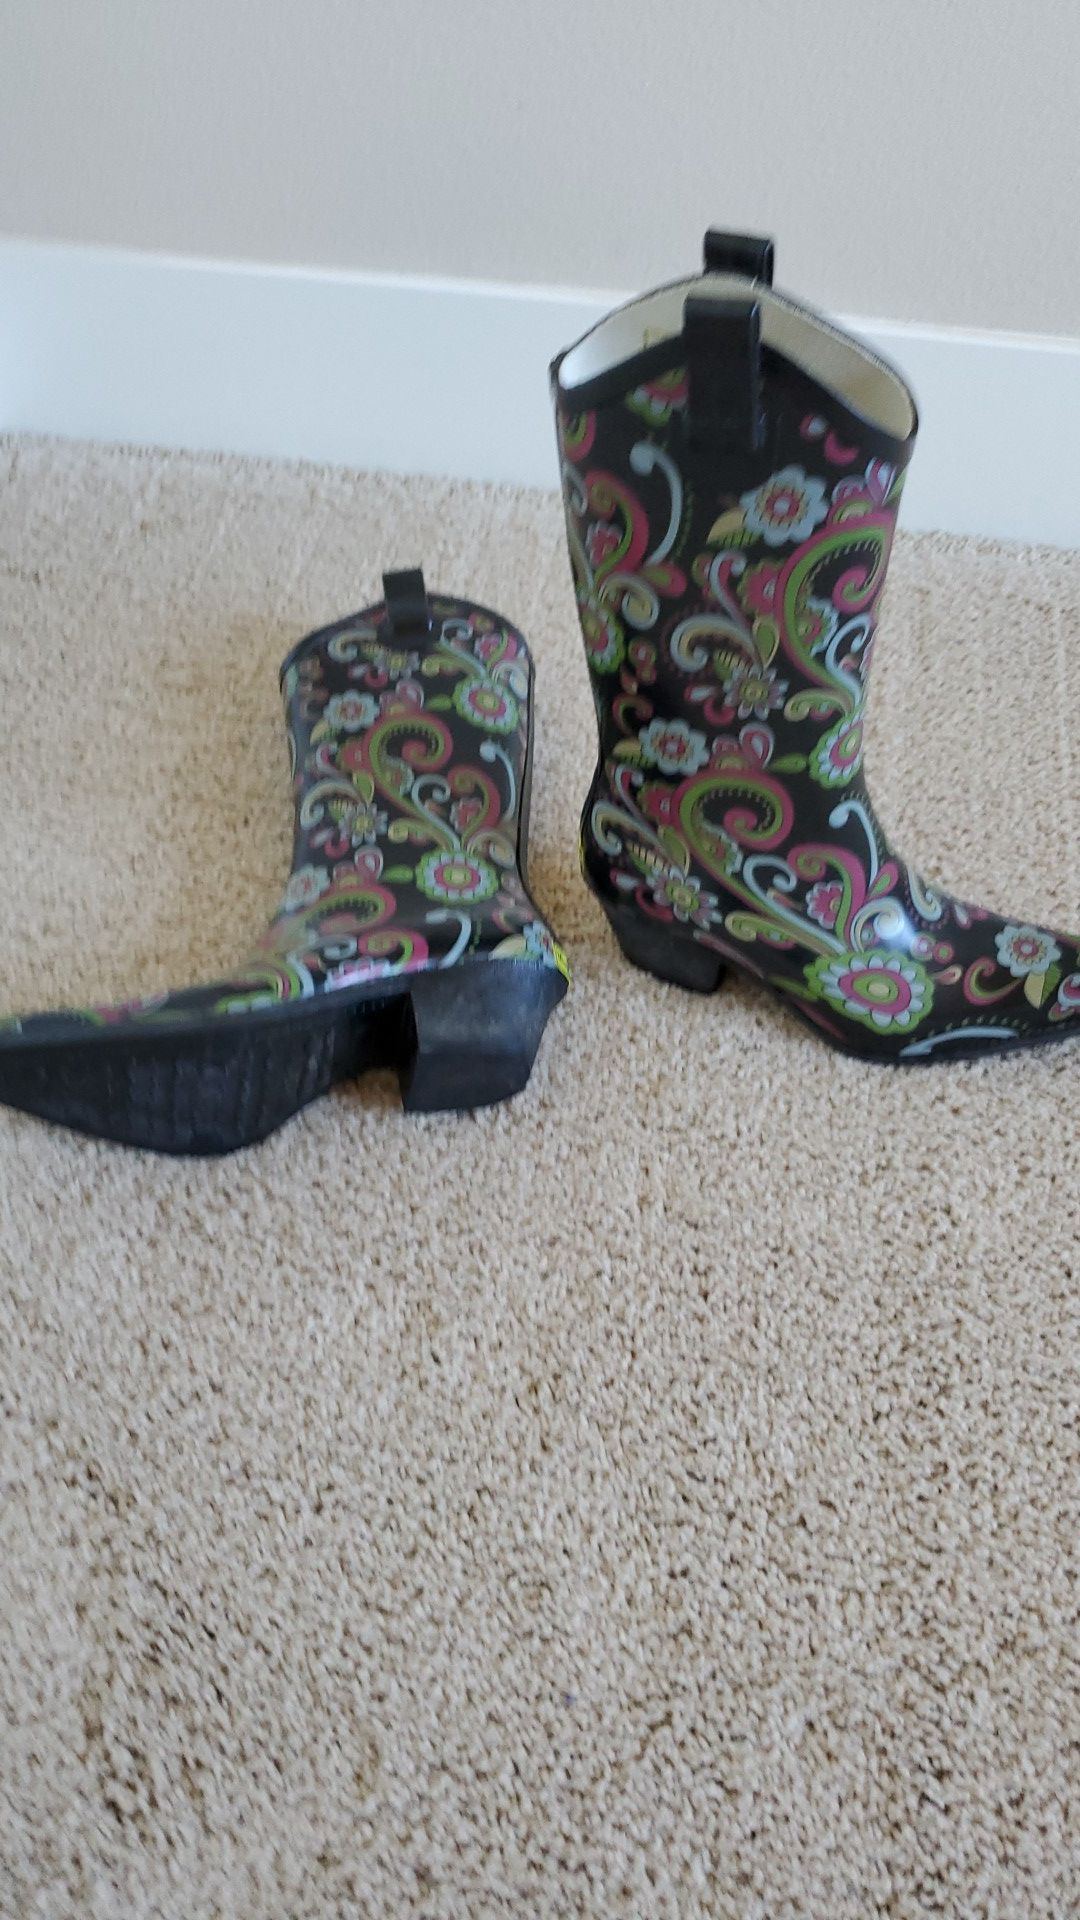 Western Chief Womens Boots. Rain boots in a cowgirl style with paisley print. Like new.